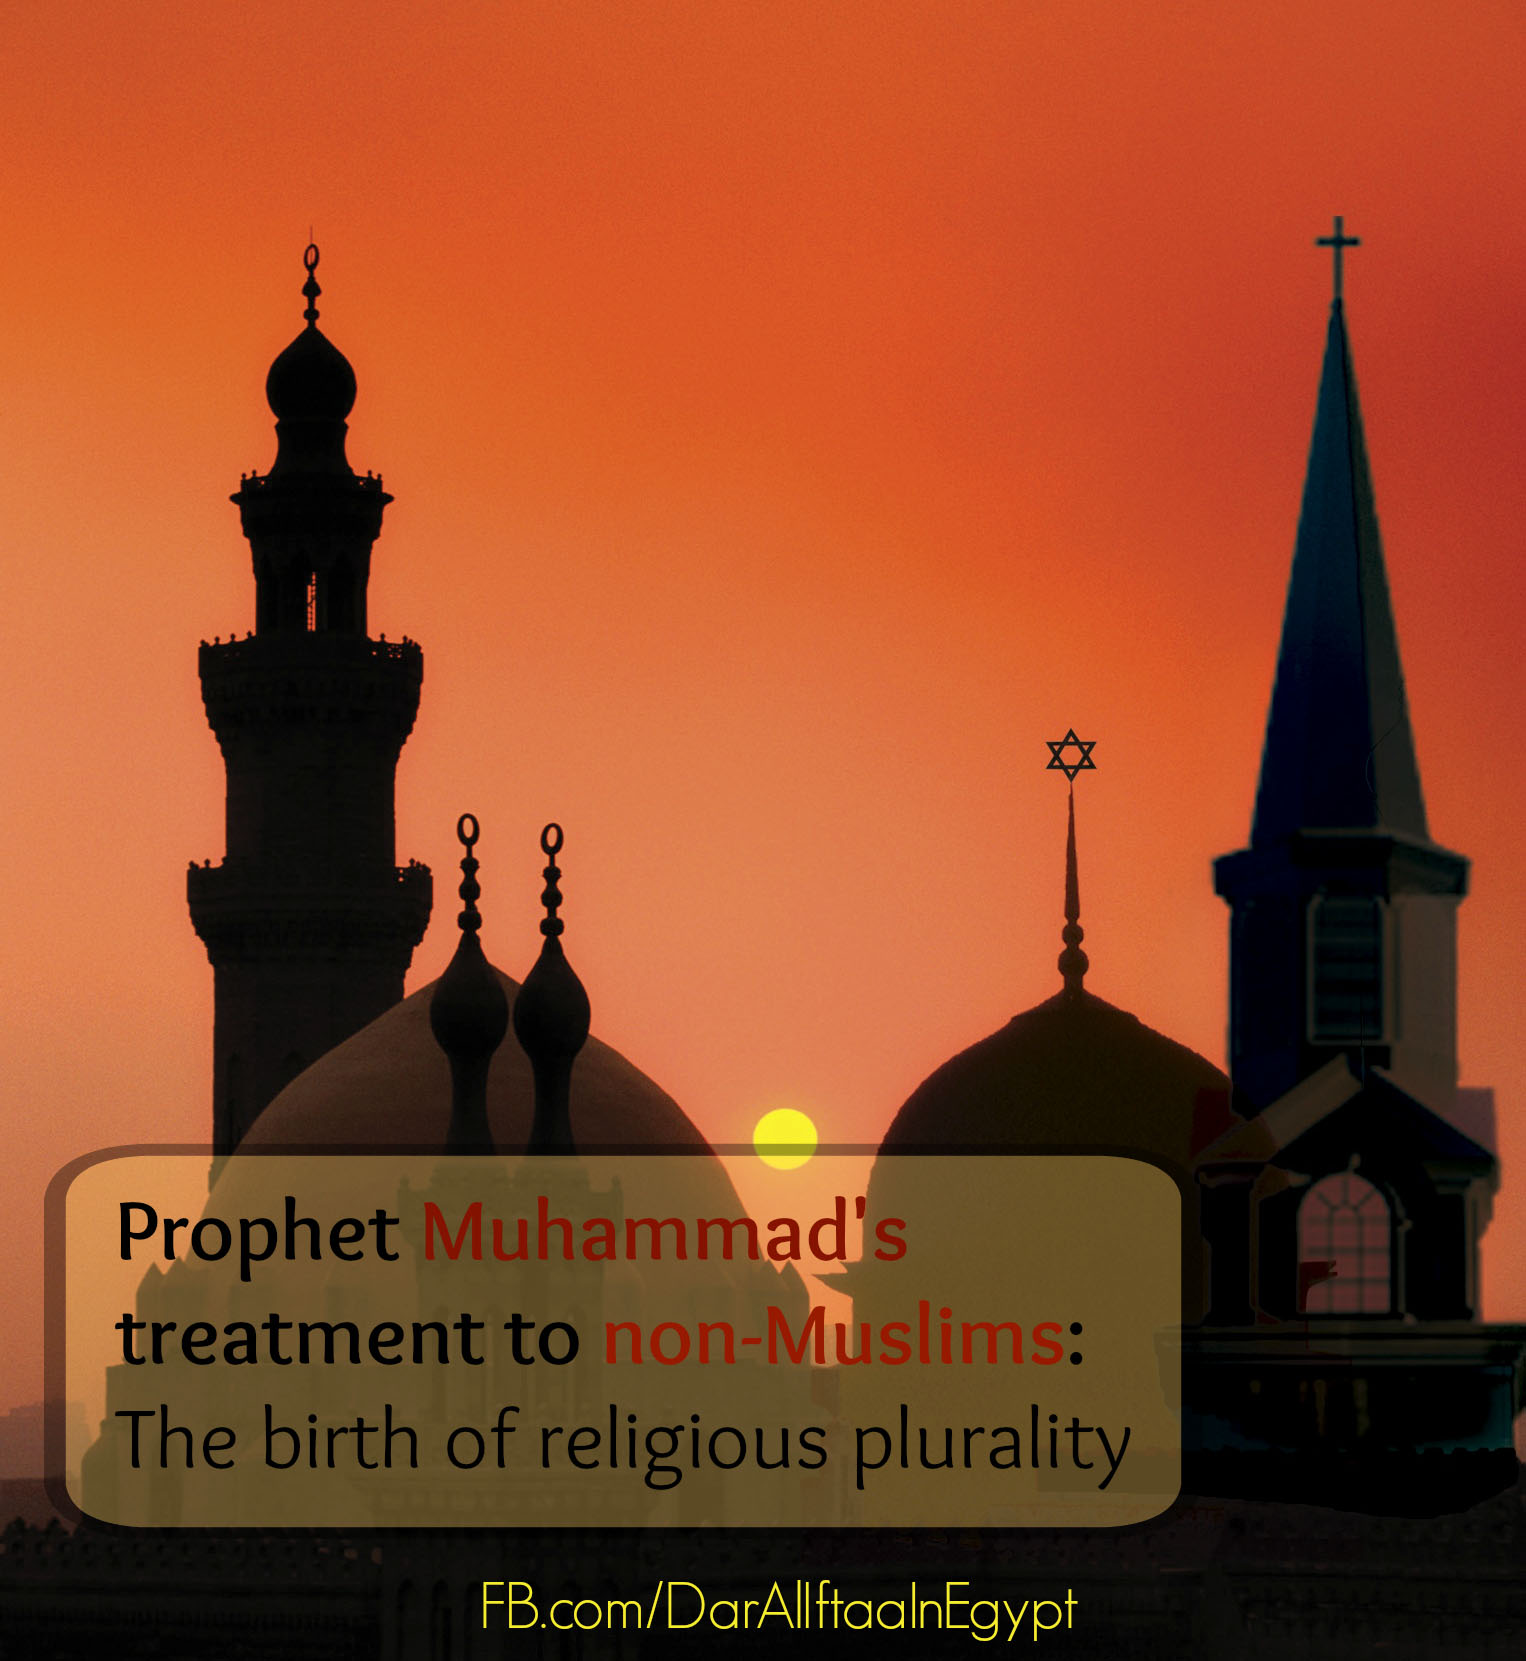 Prophet Muhammad's treatment to non-Muslims: The birth of religious plurality